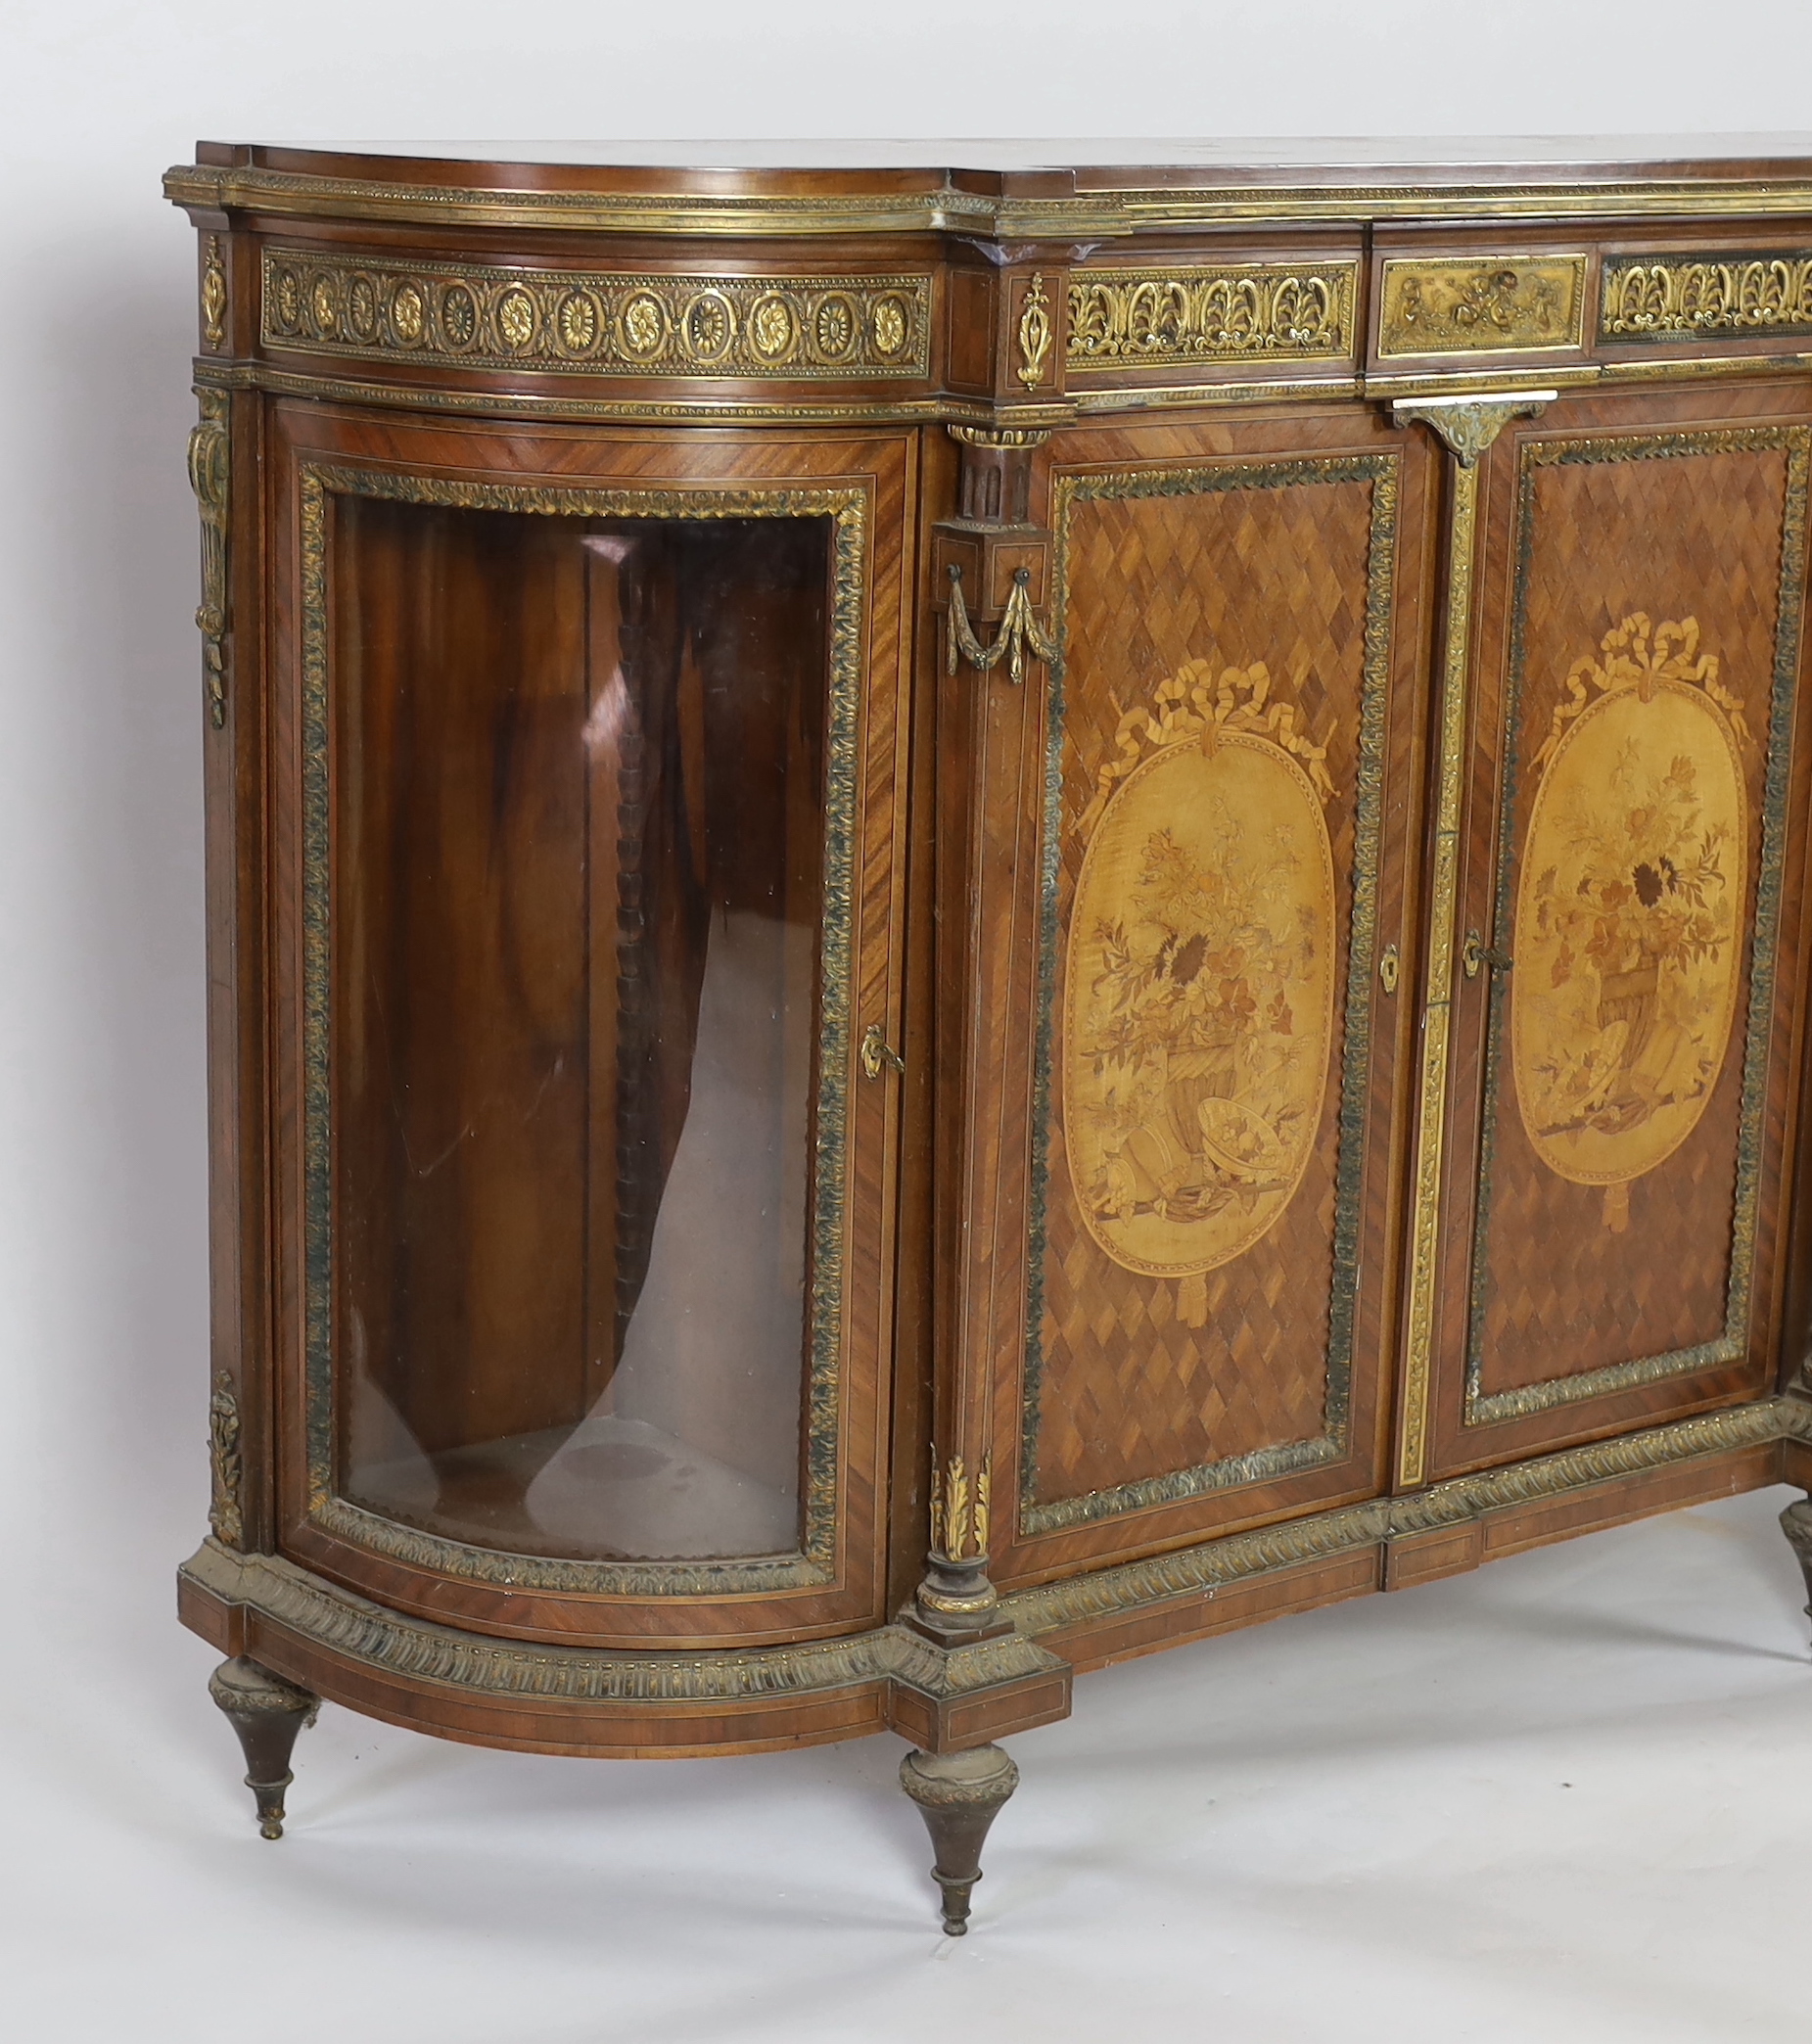 A late 19th century French Louis XVI style inlaid mahogany and ormolu mounted credenza